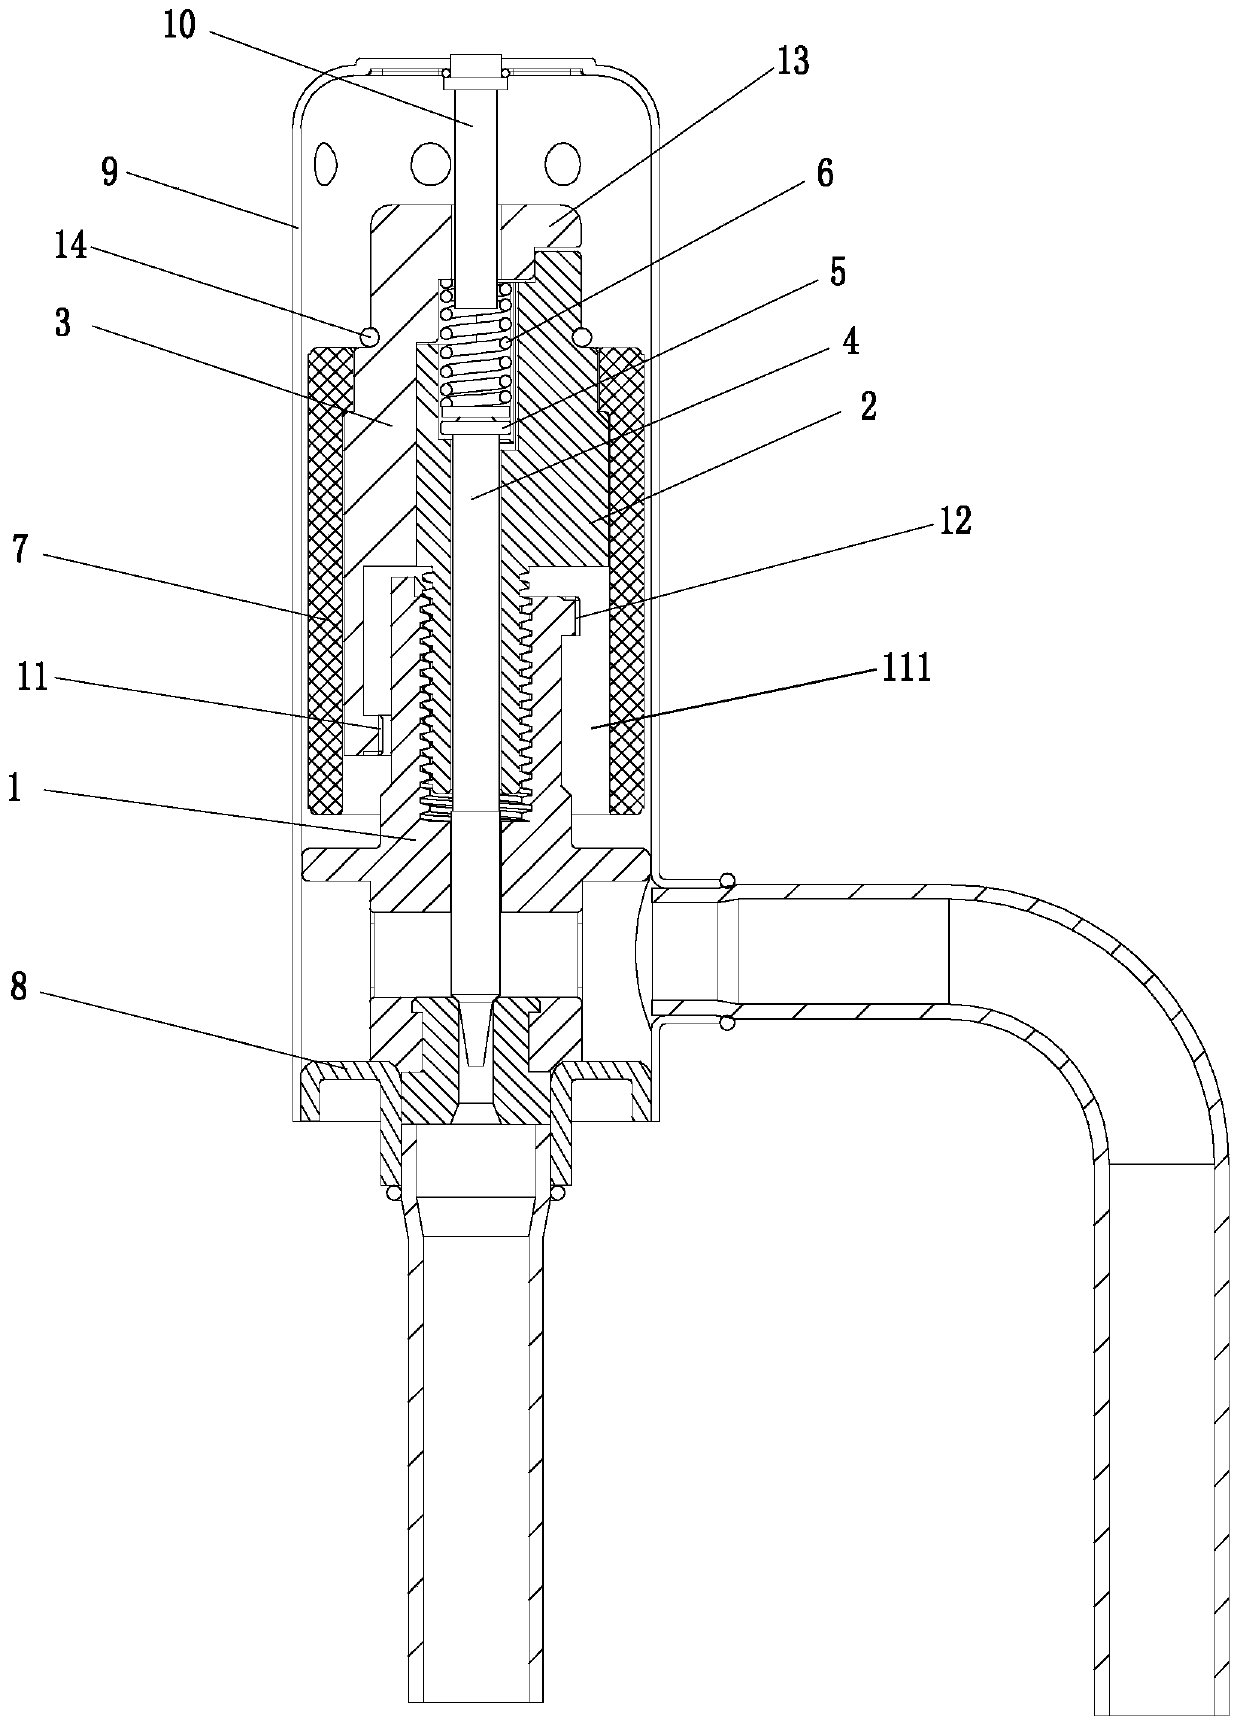 Thread transmission mechanism and electric valve containing thread transmission mechanism